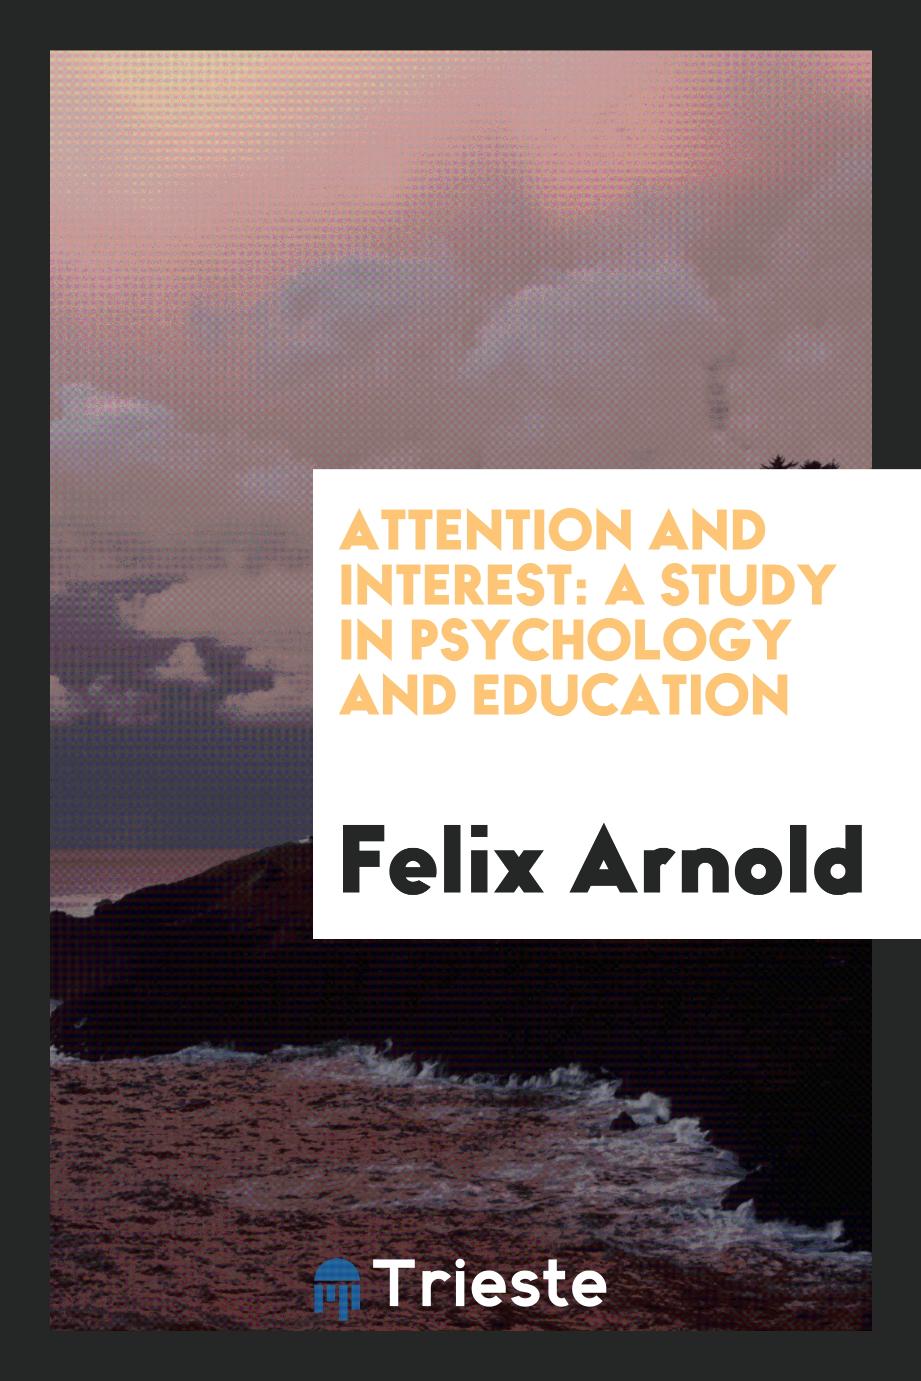 Attention and interest: a study in psychology and education